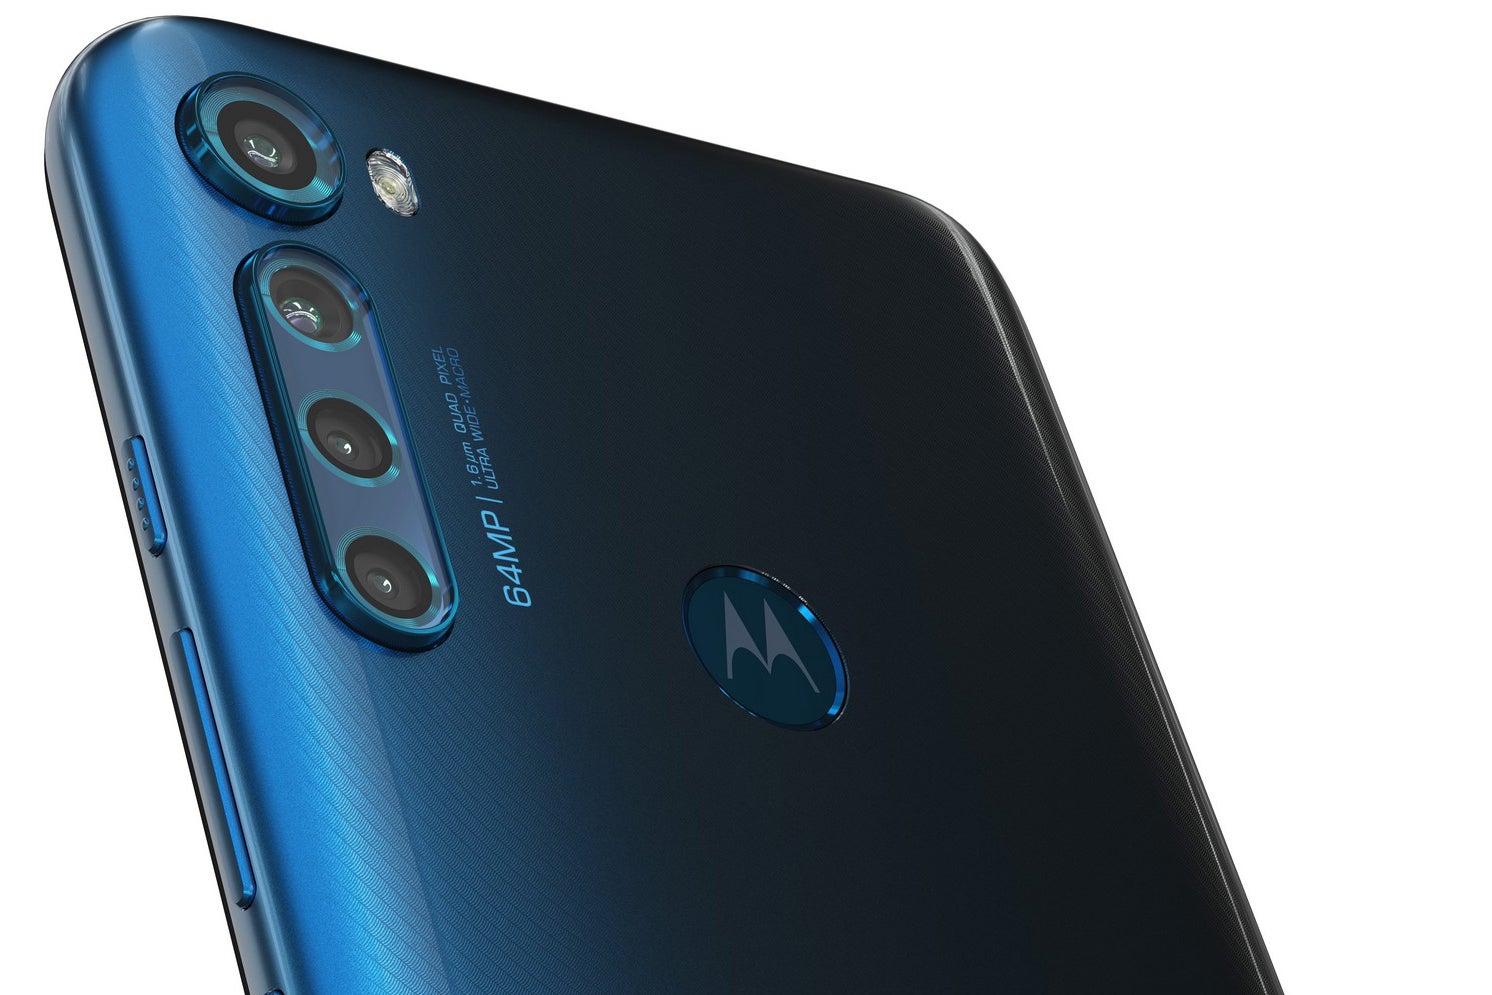 Motorola One Fusion+ goes official: The 5,000mAh quad-camera monster!